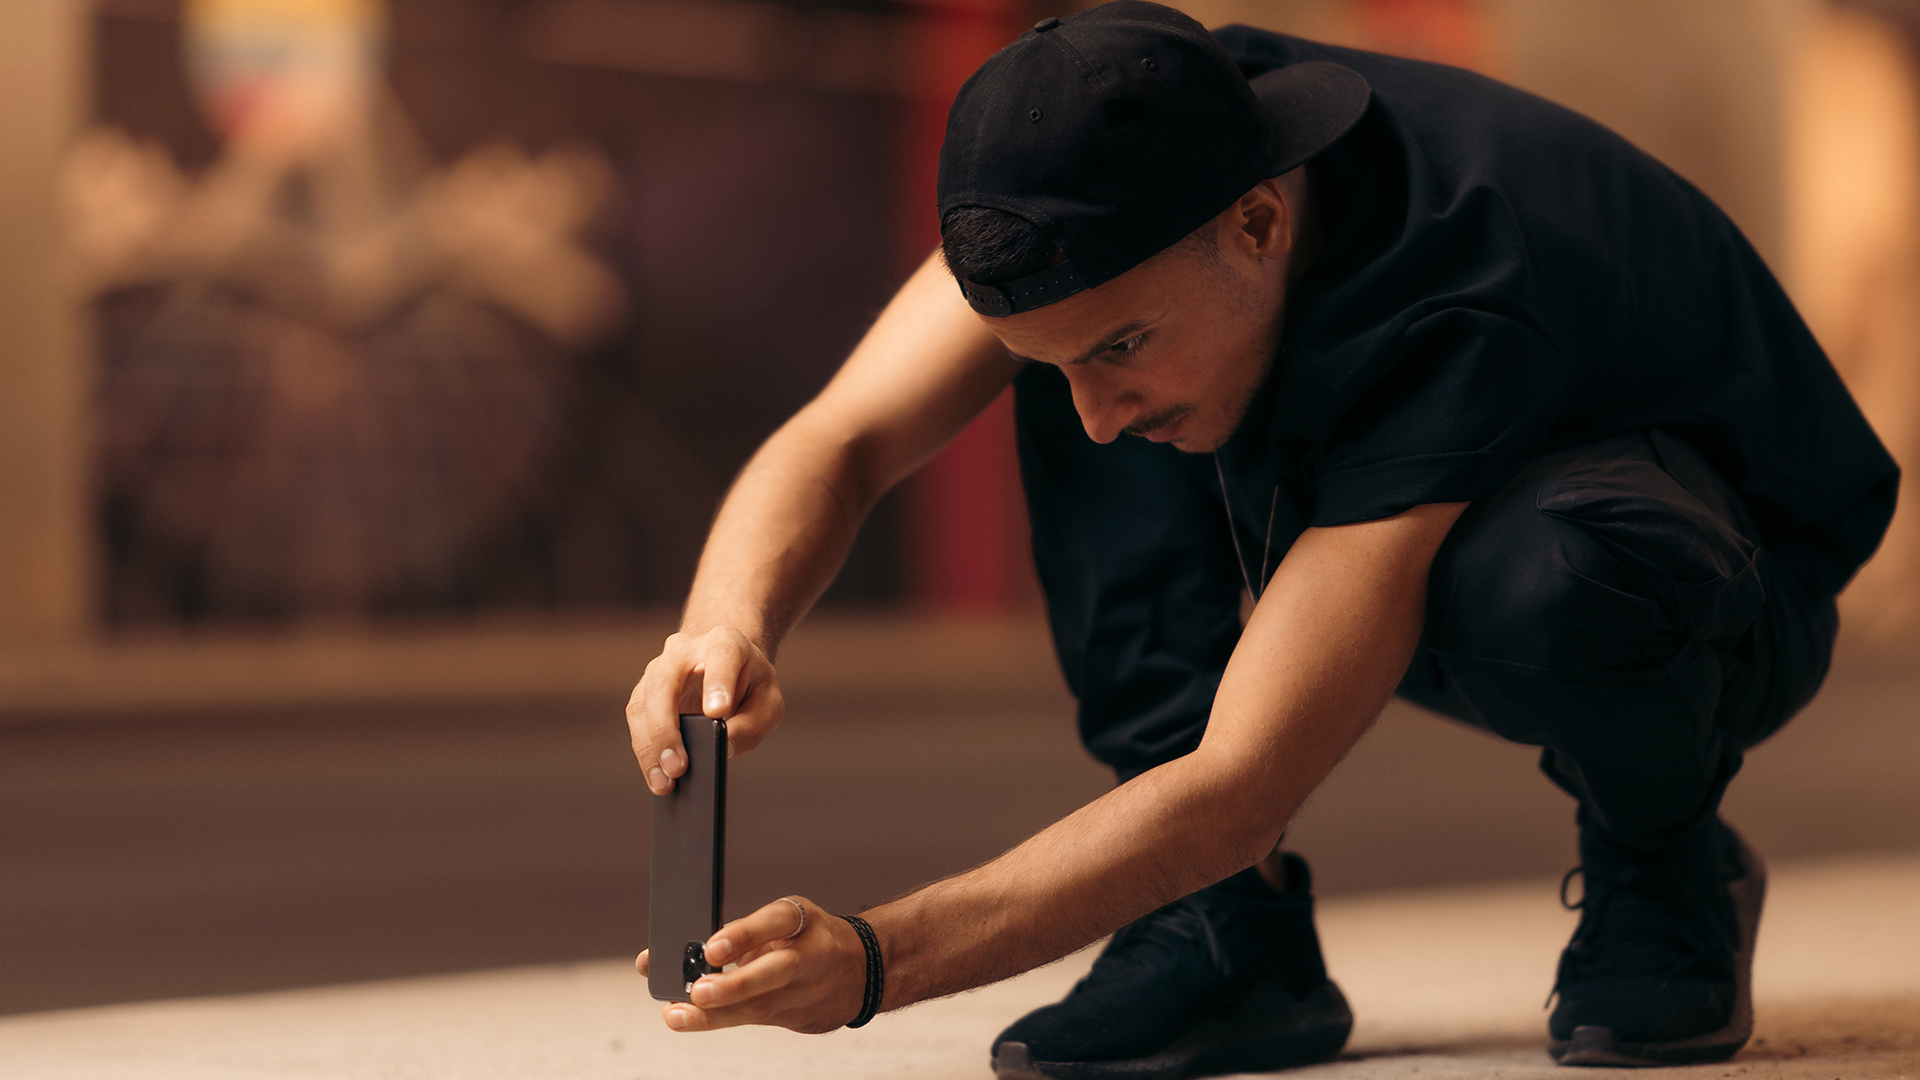 Man dressed in black shirt, trousers, shoes and hat, kneeling to hold his phone at a lower angle.